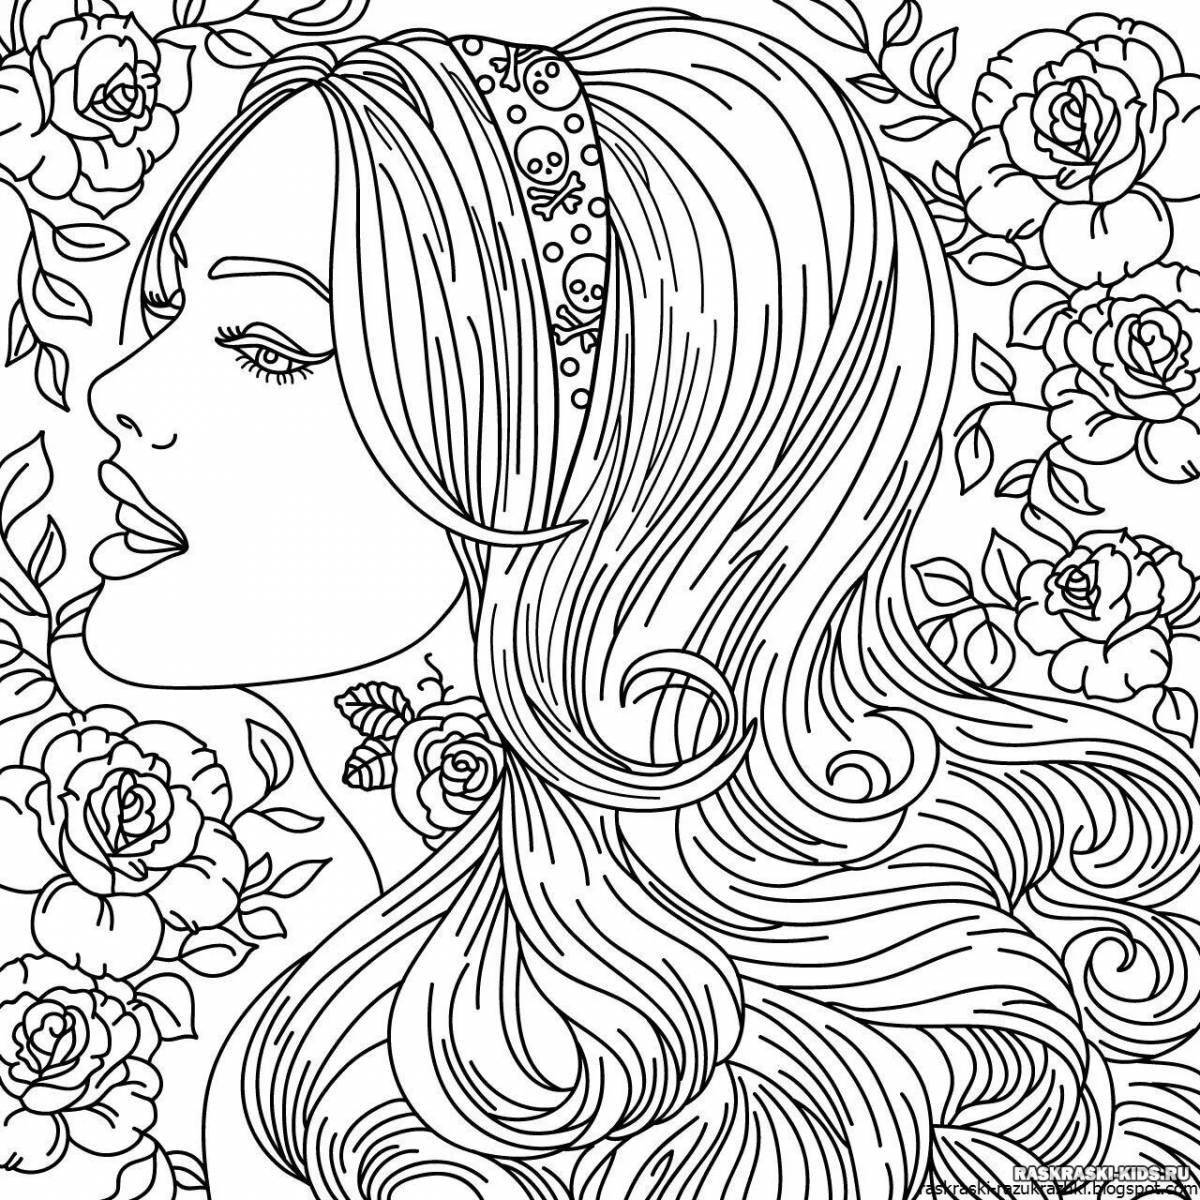 Dazzling coloring book for 14 year old girls